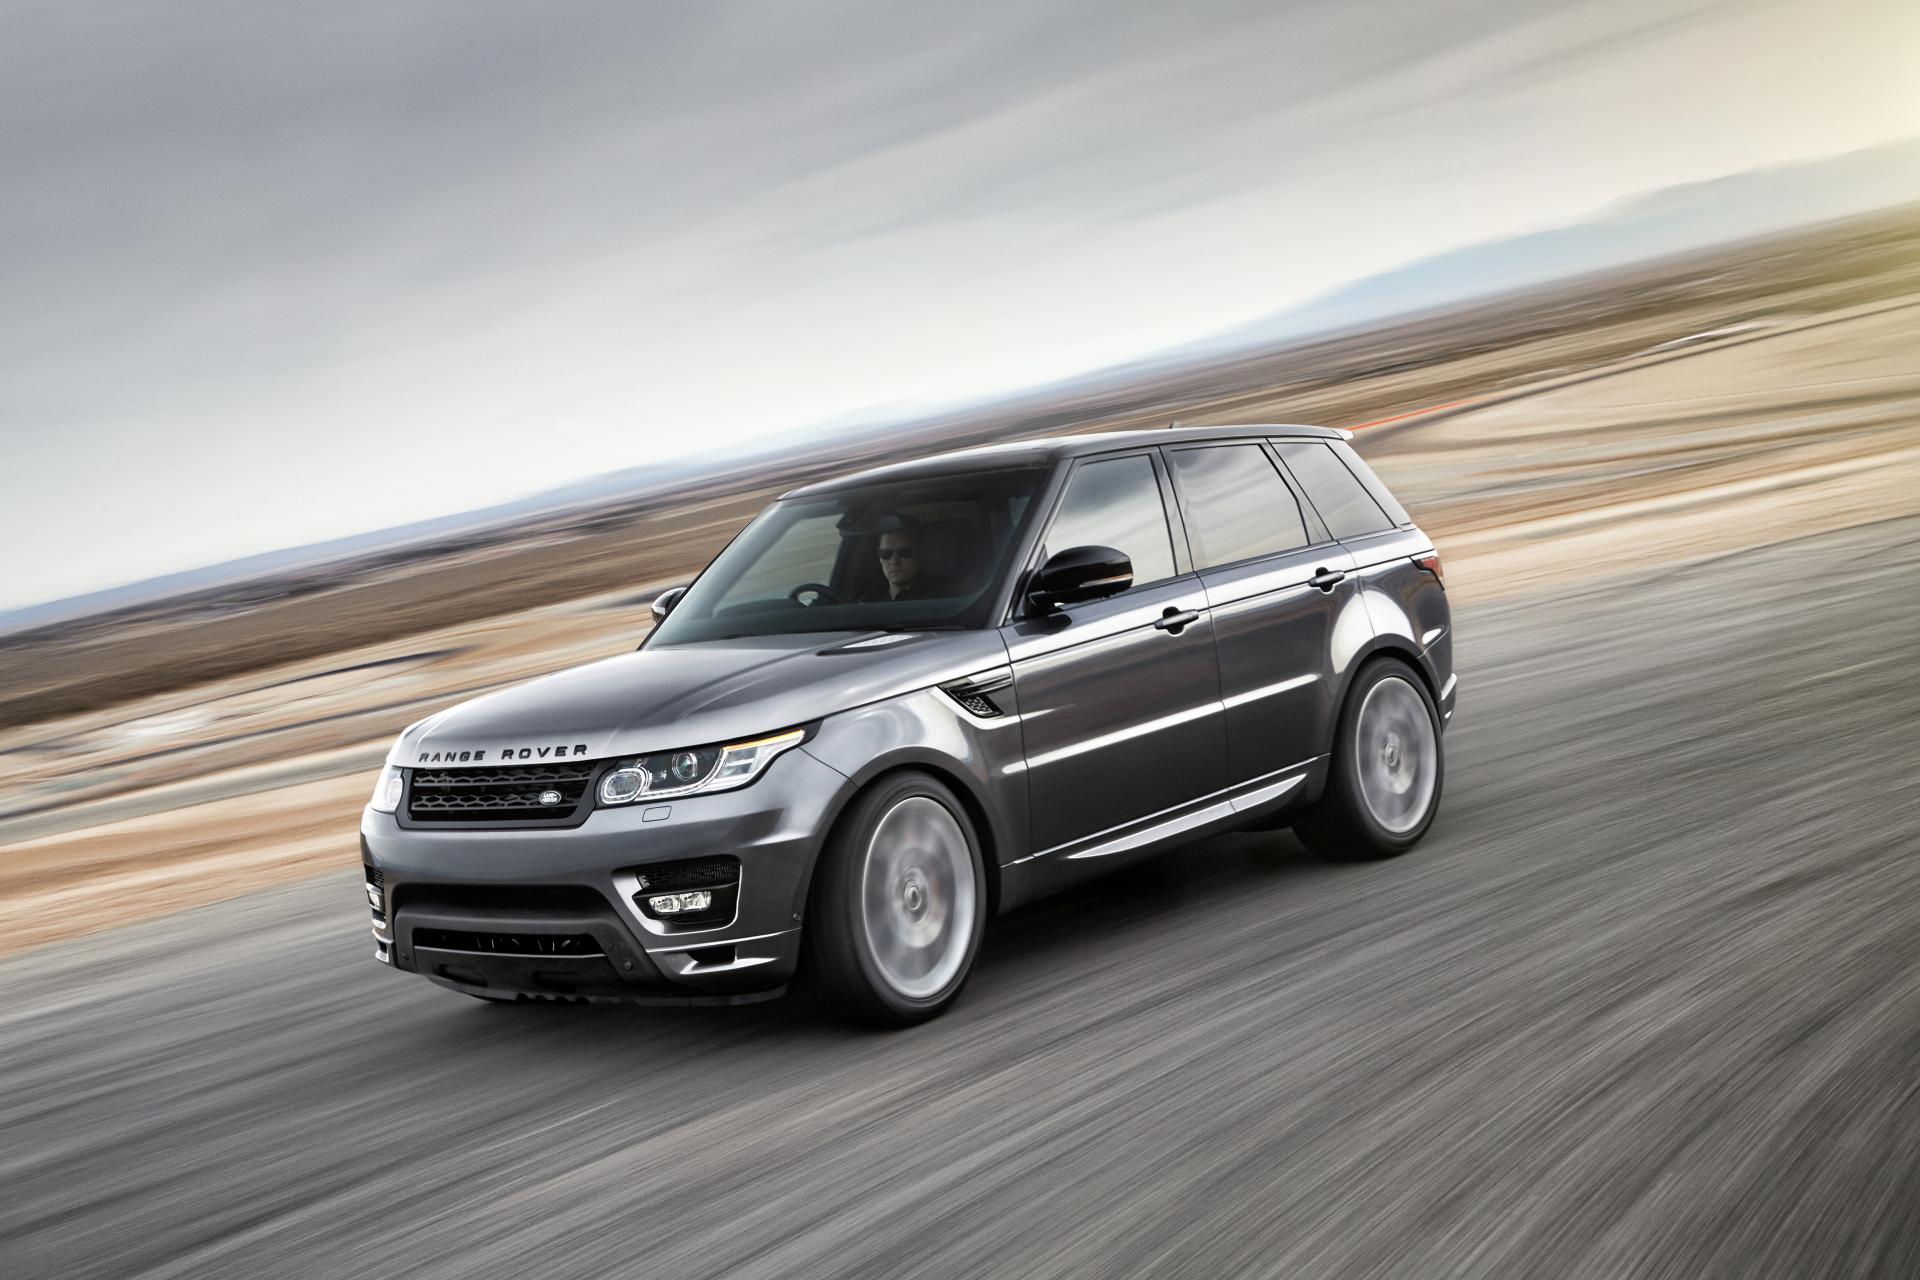 2014 Land Rover Range Rover Sport News and